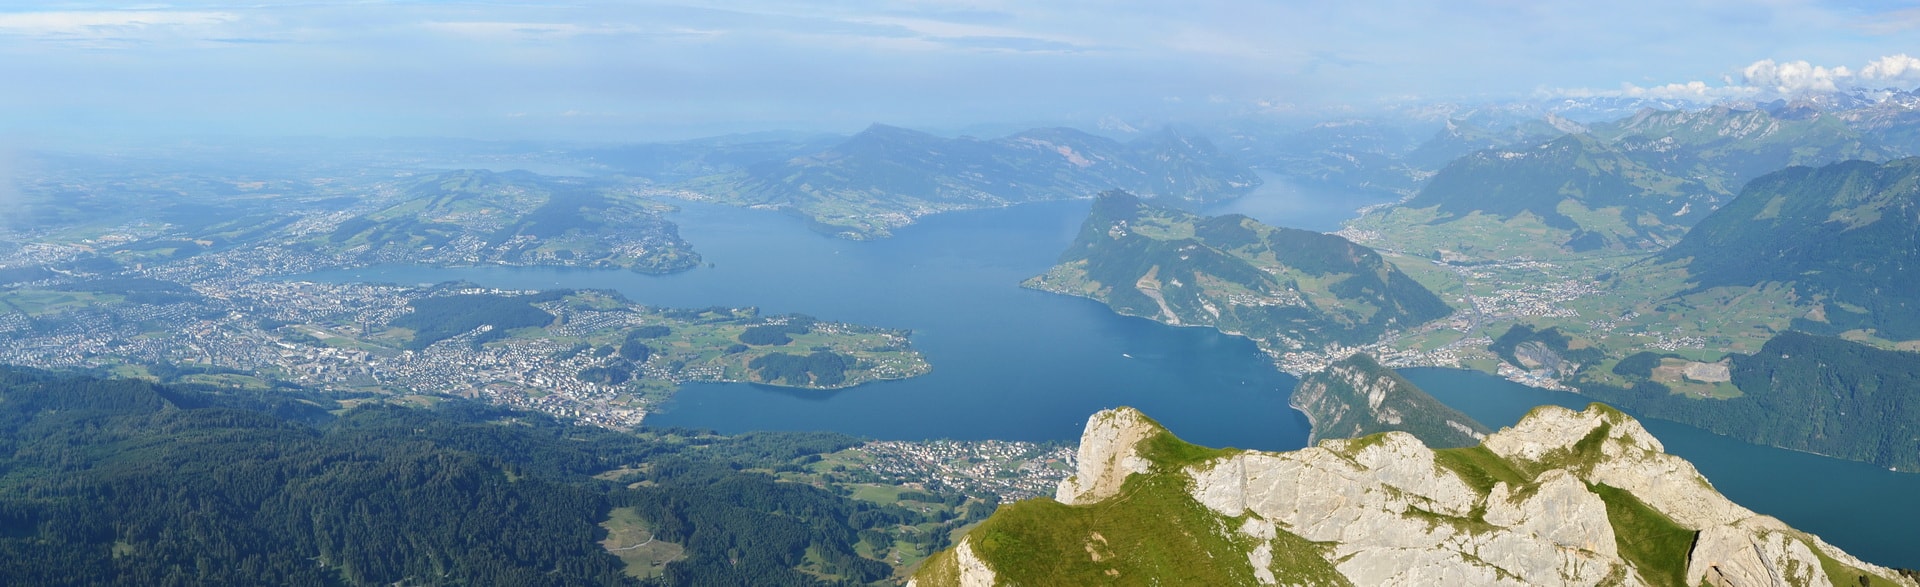 Lake Lucerne and the City of Lucerne, looking from Esel